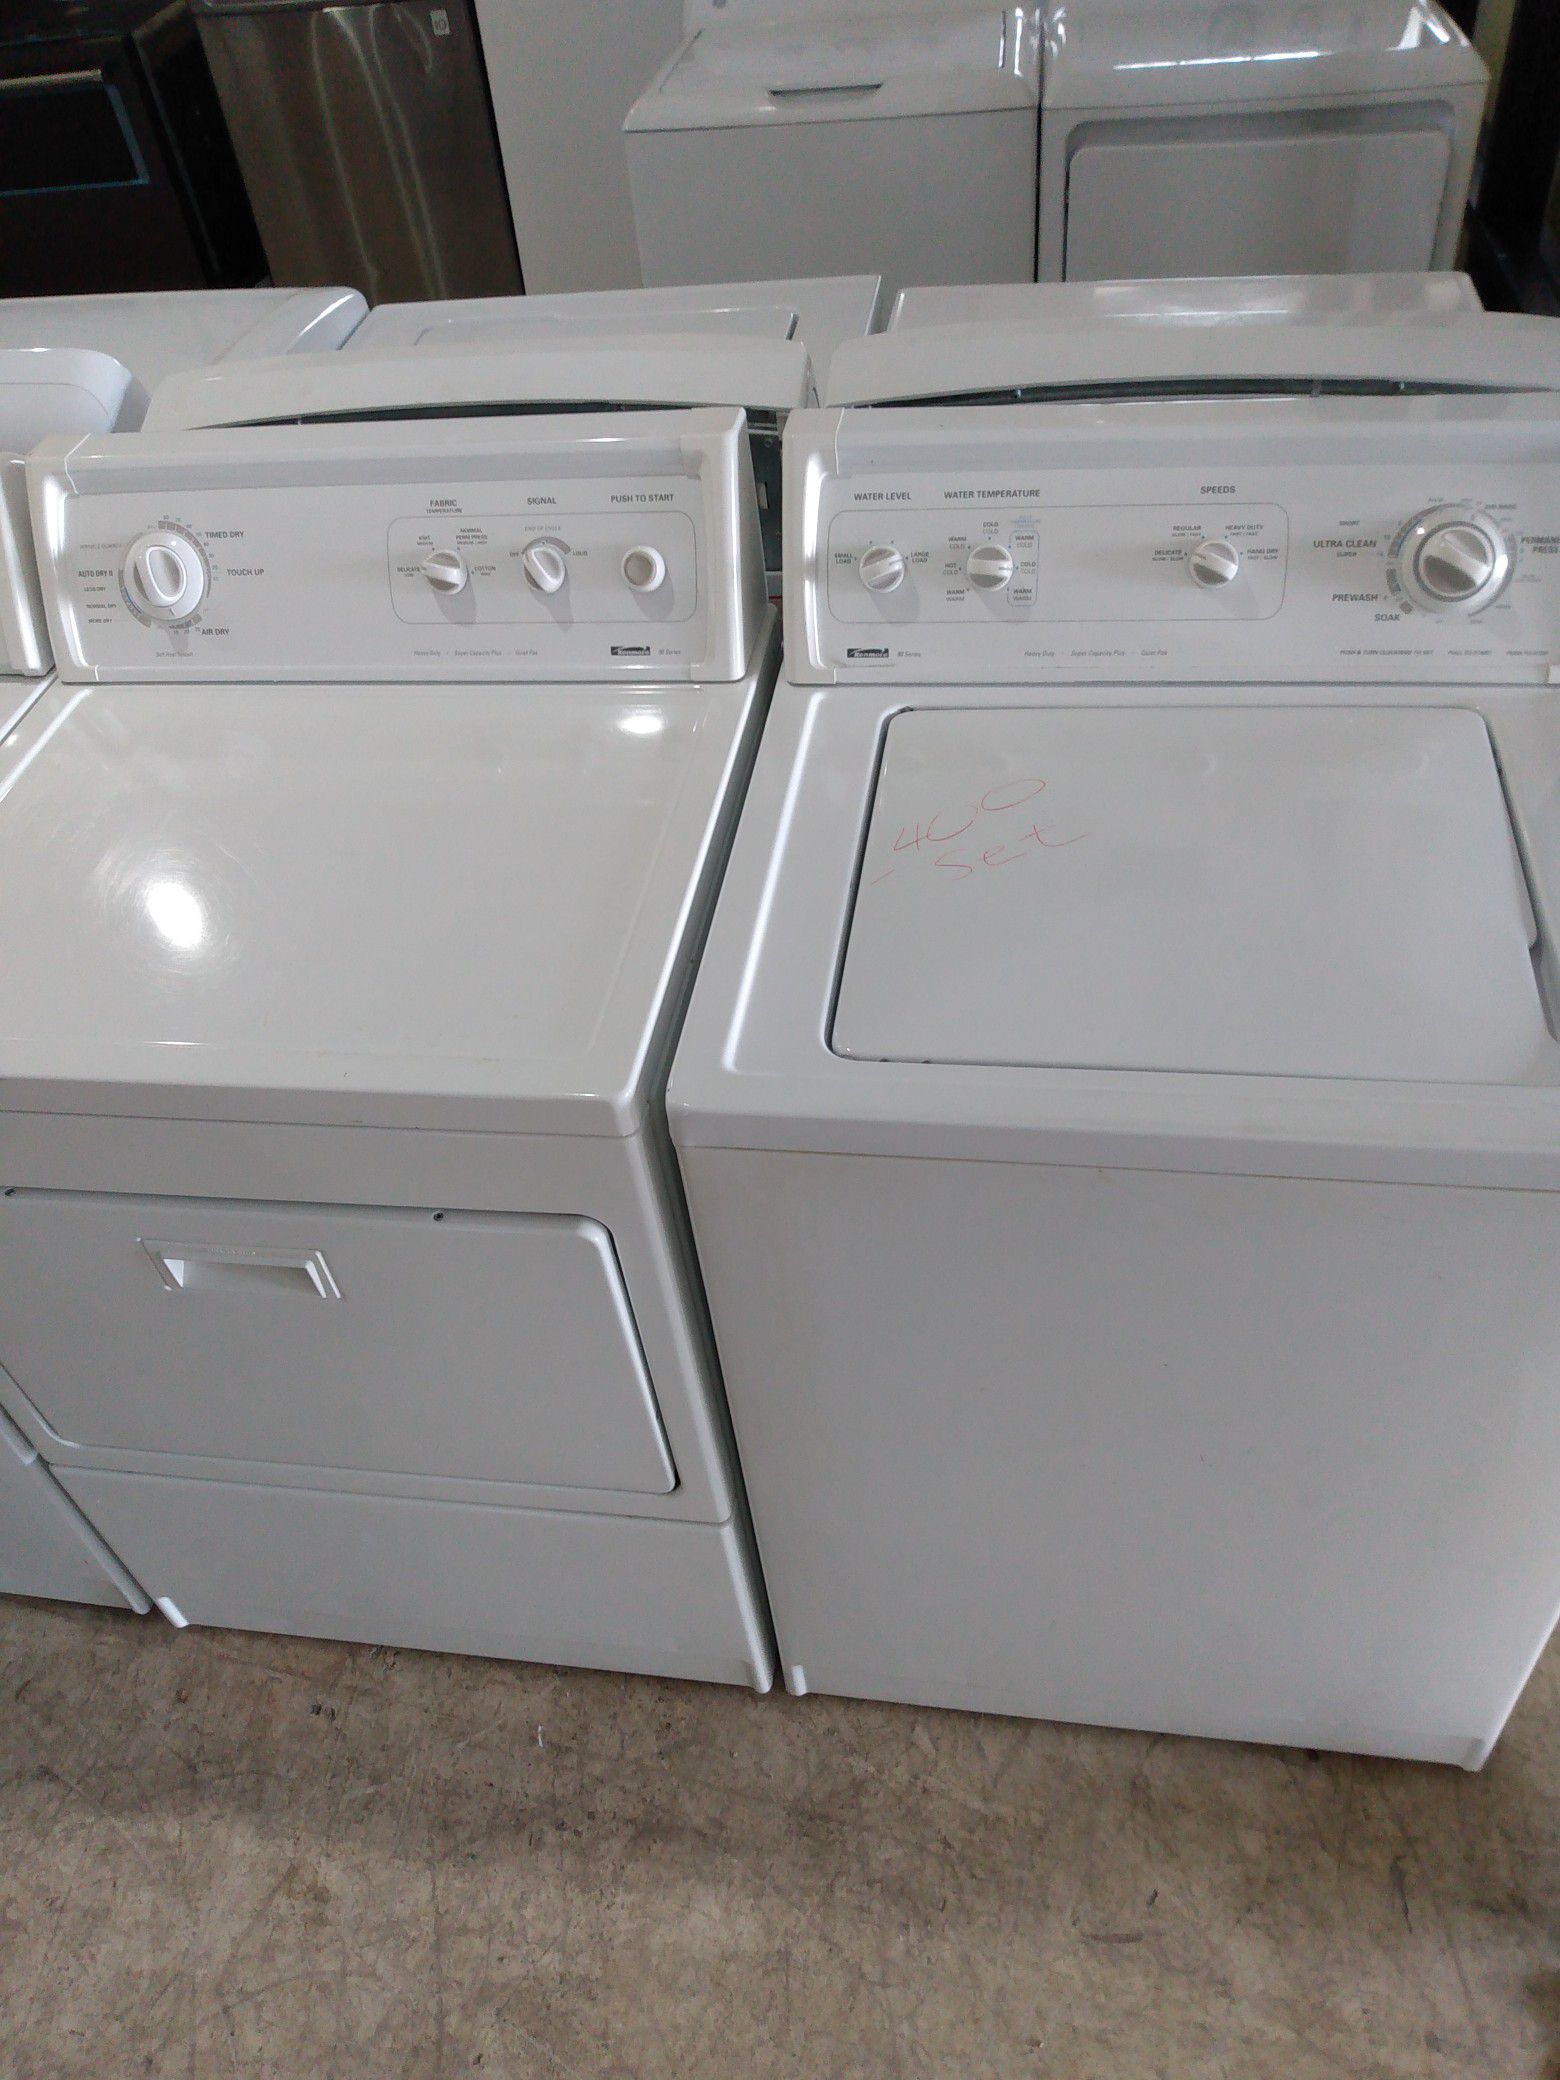 Kenmore washer and dryer works great